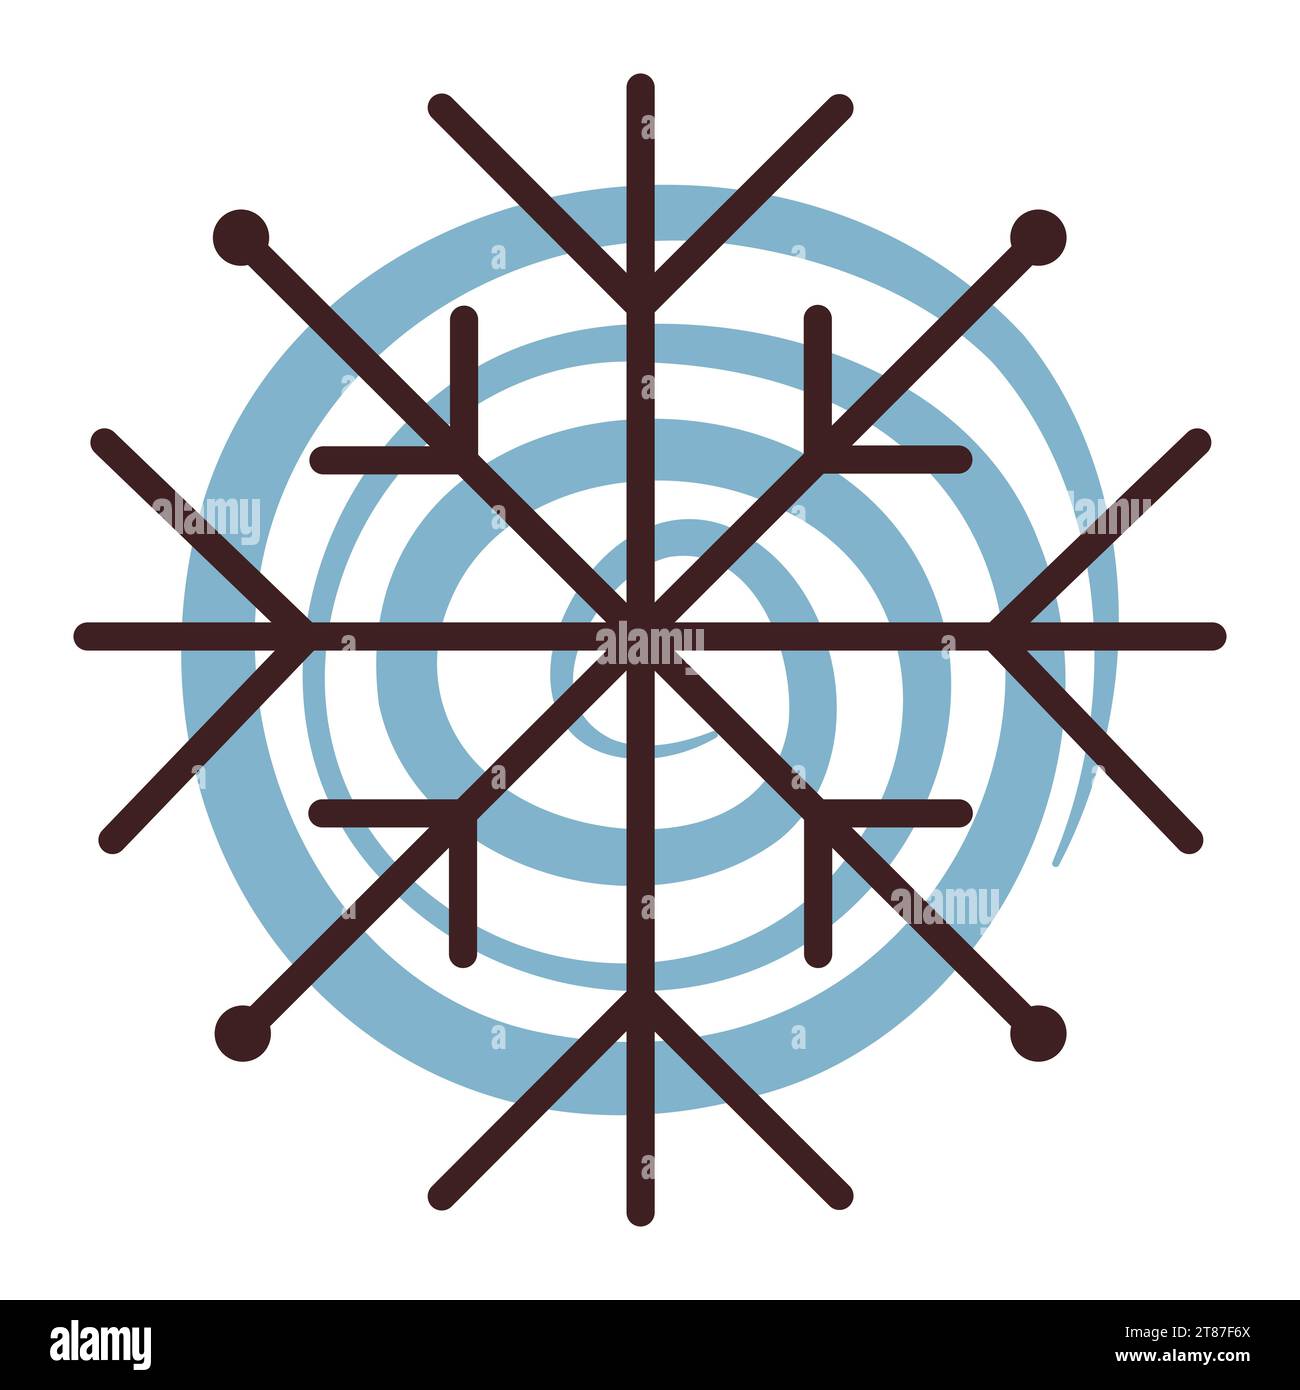 Groovy snowflake, winter season icon in brown and blue colors Stock Vector